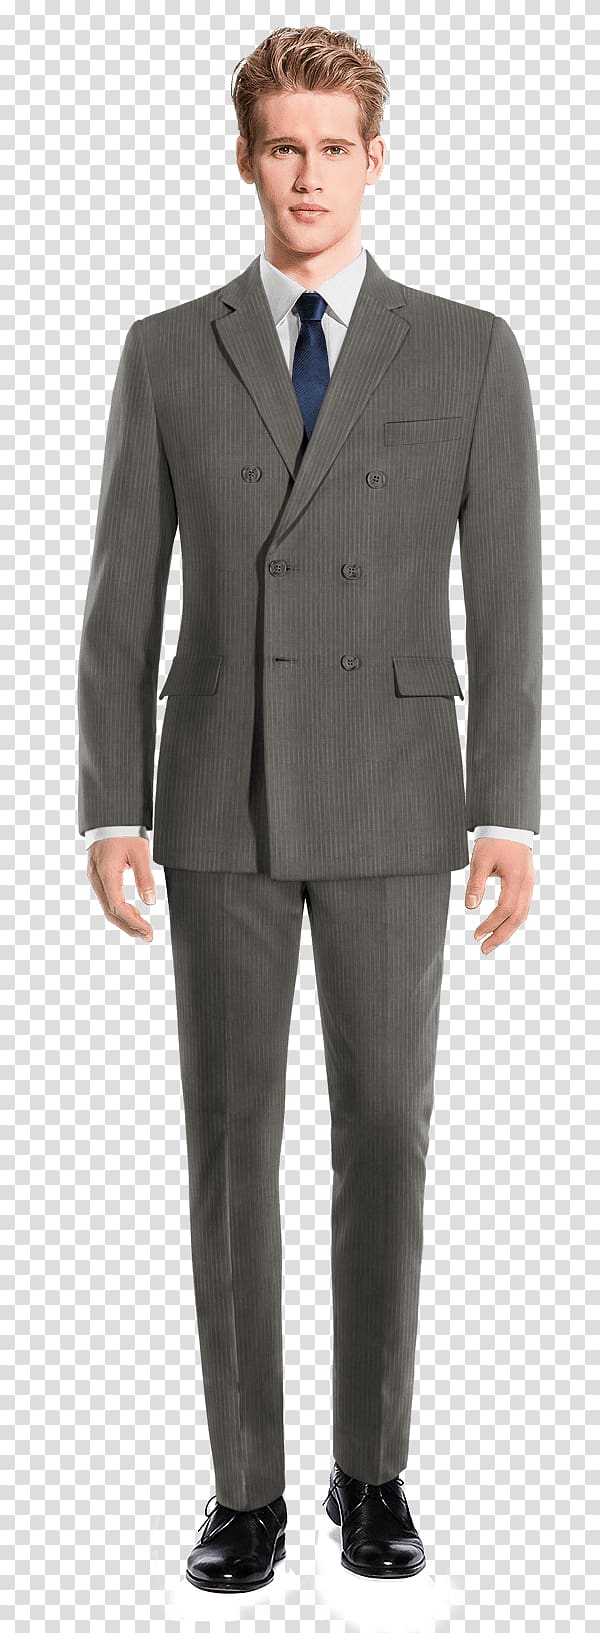 Suit Tuxedo Double-breasted Tweed Black tie, suit transparent background PNG clipart